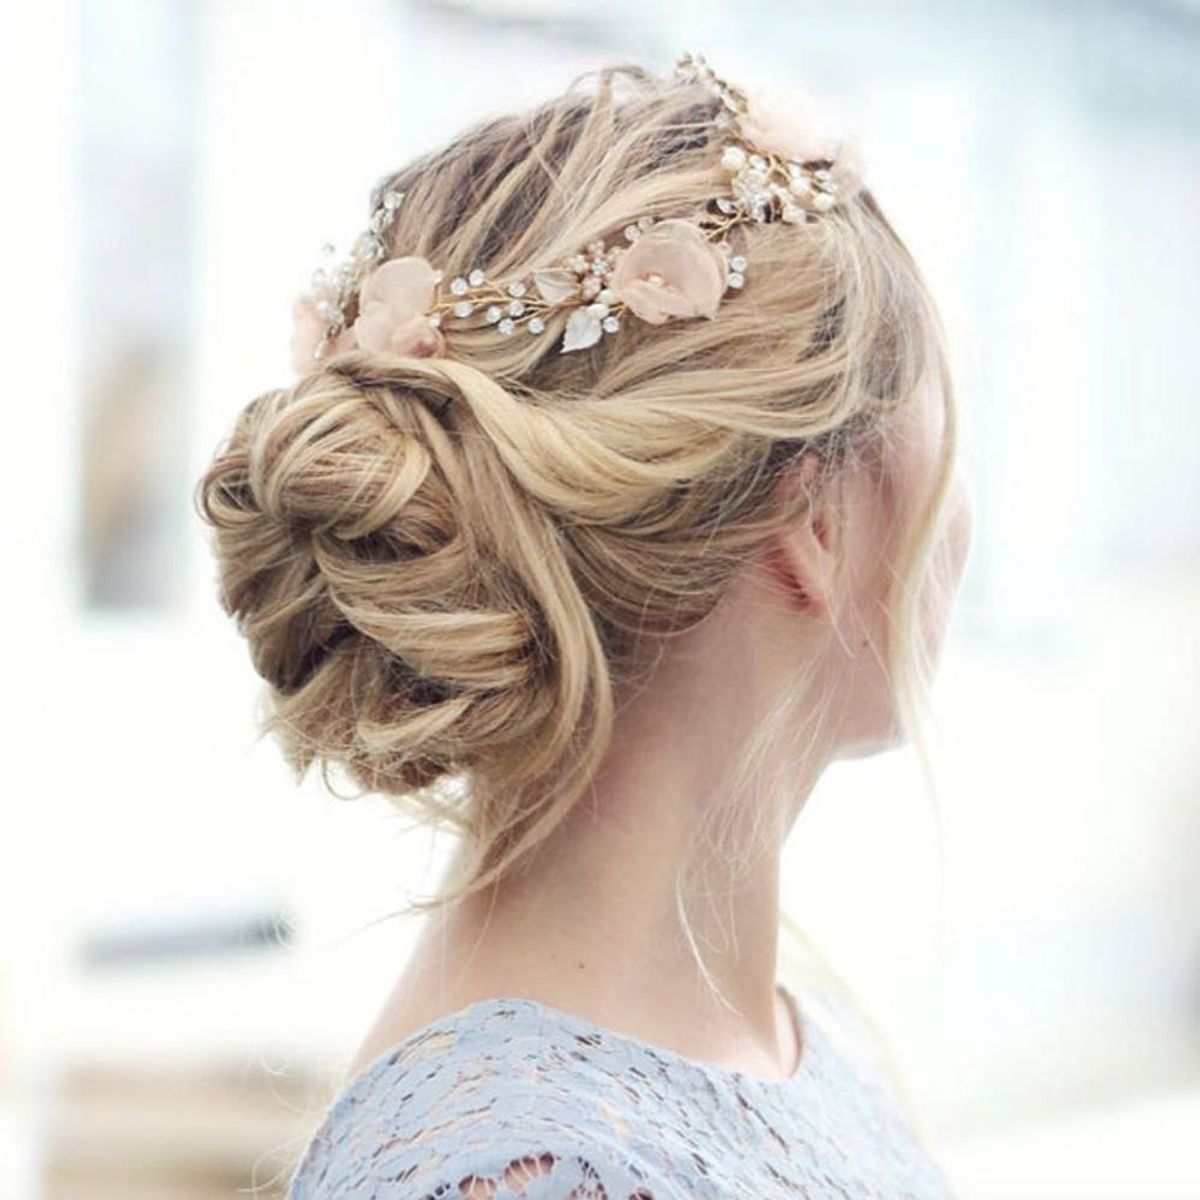 14 Pretty Chignons That Will Make Your Easter Sunday Outfit